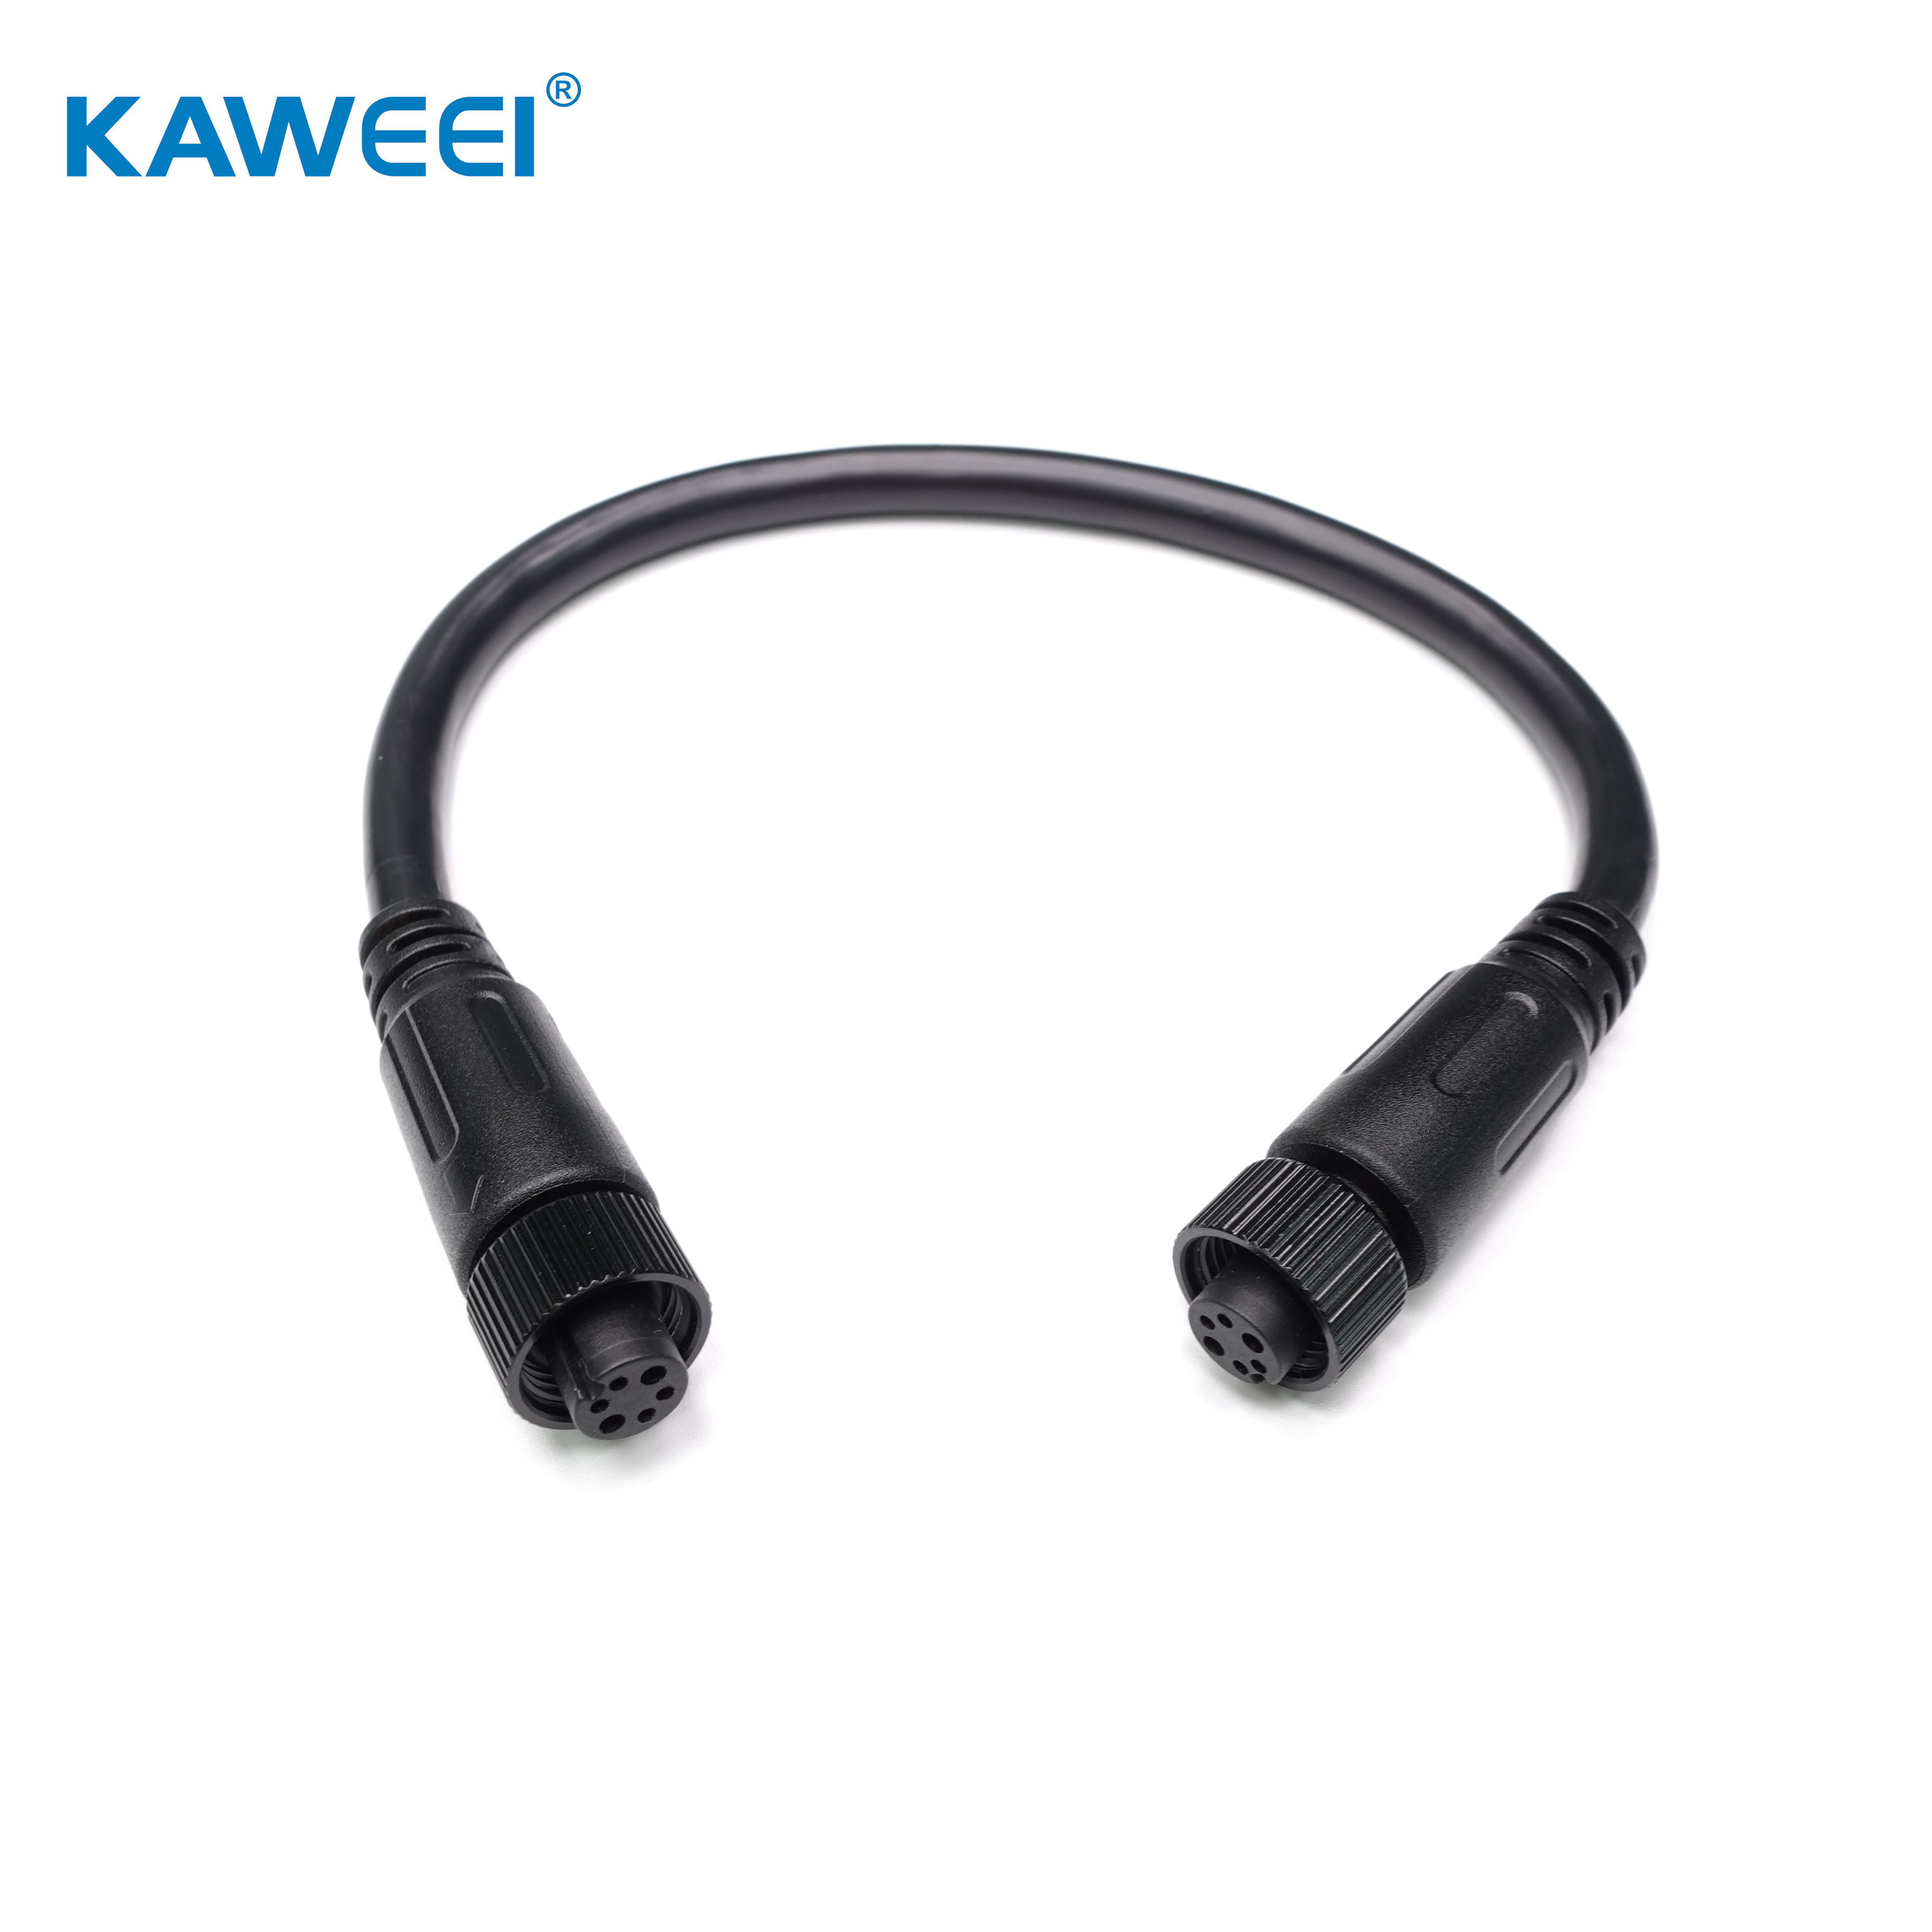 /m12-sight-sonsor-actuator-cable-assemblies-product/